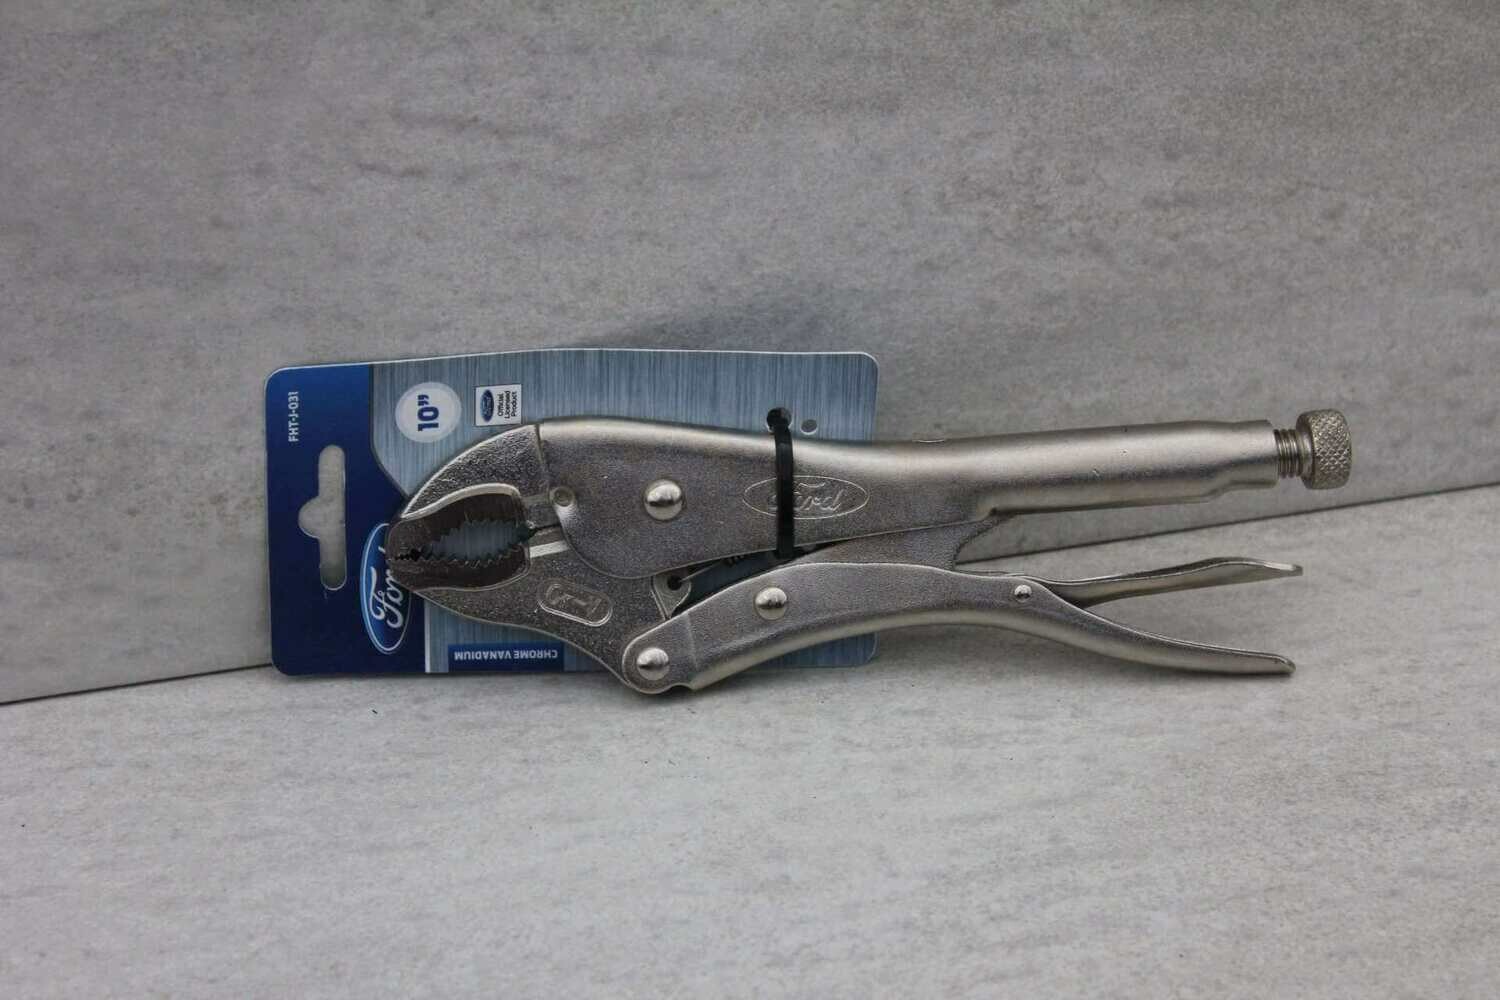 Ford vice grip 10" locking pliers